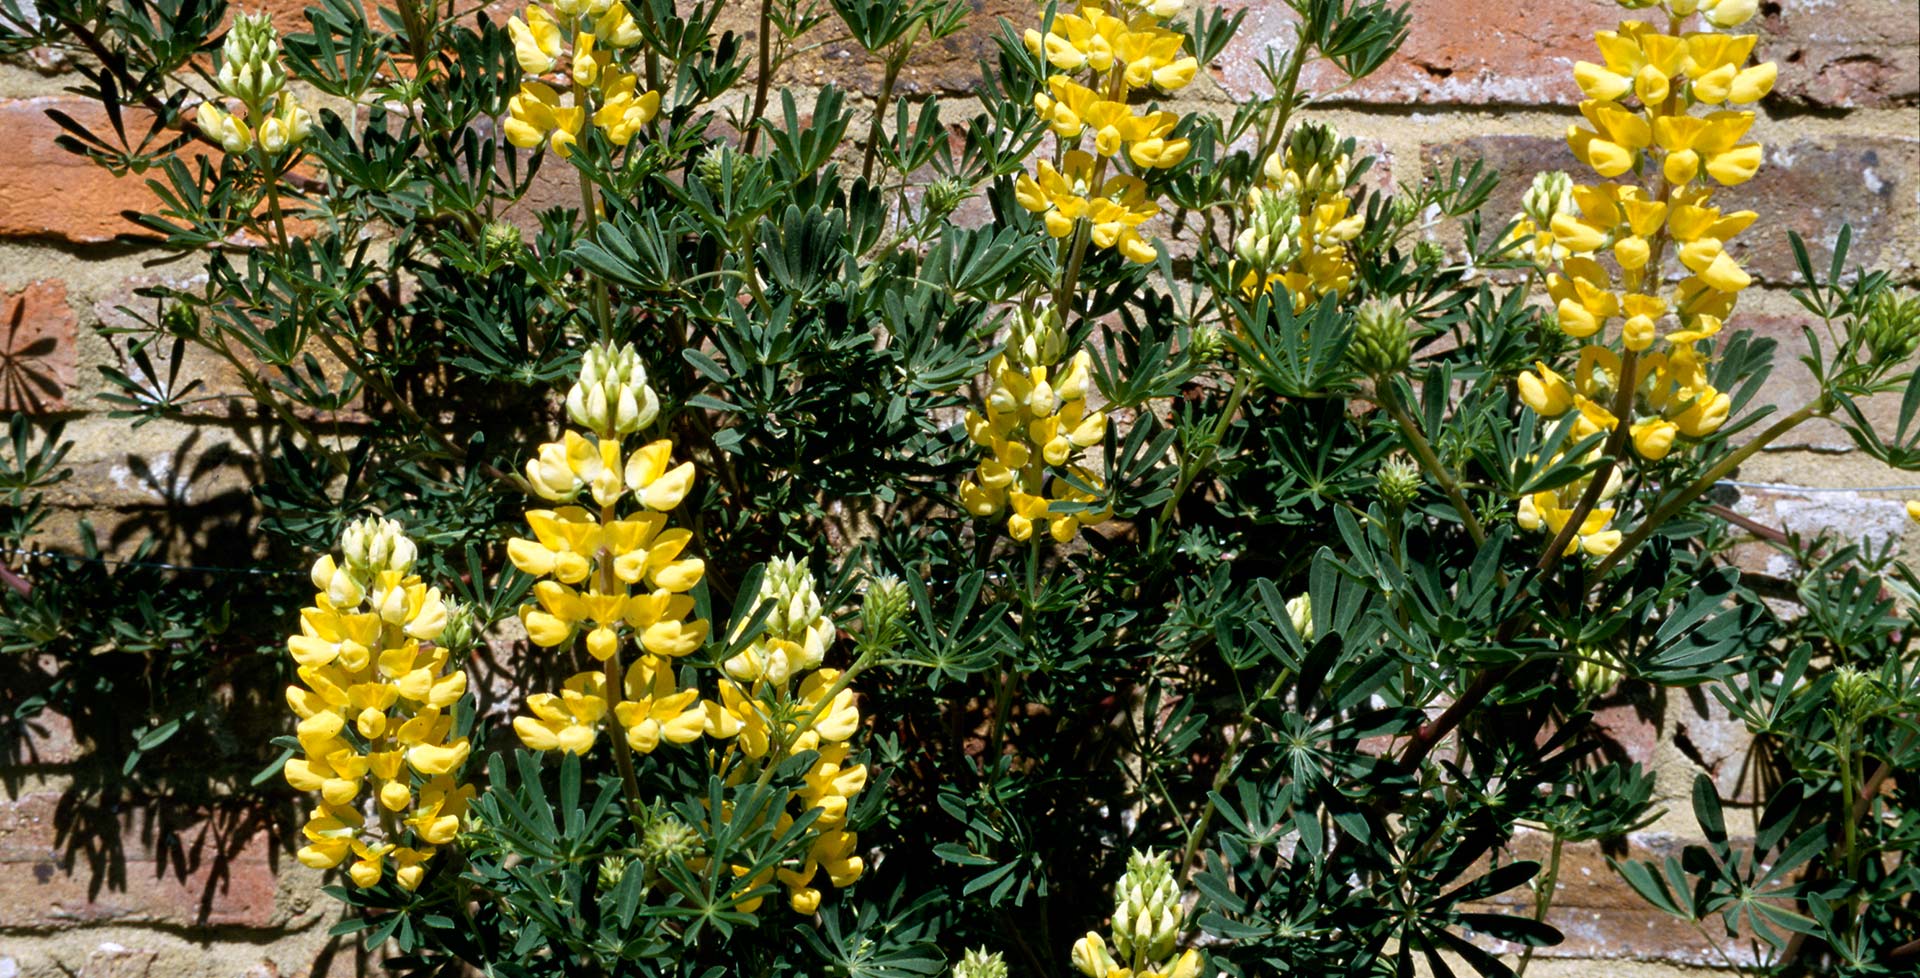 The Salty Lupine